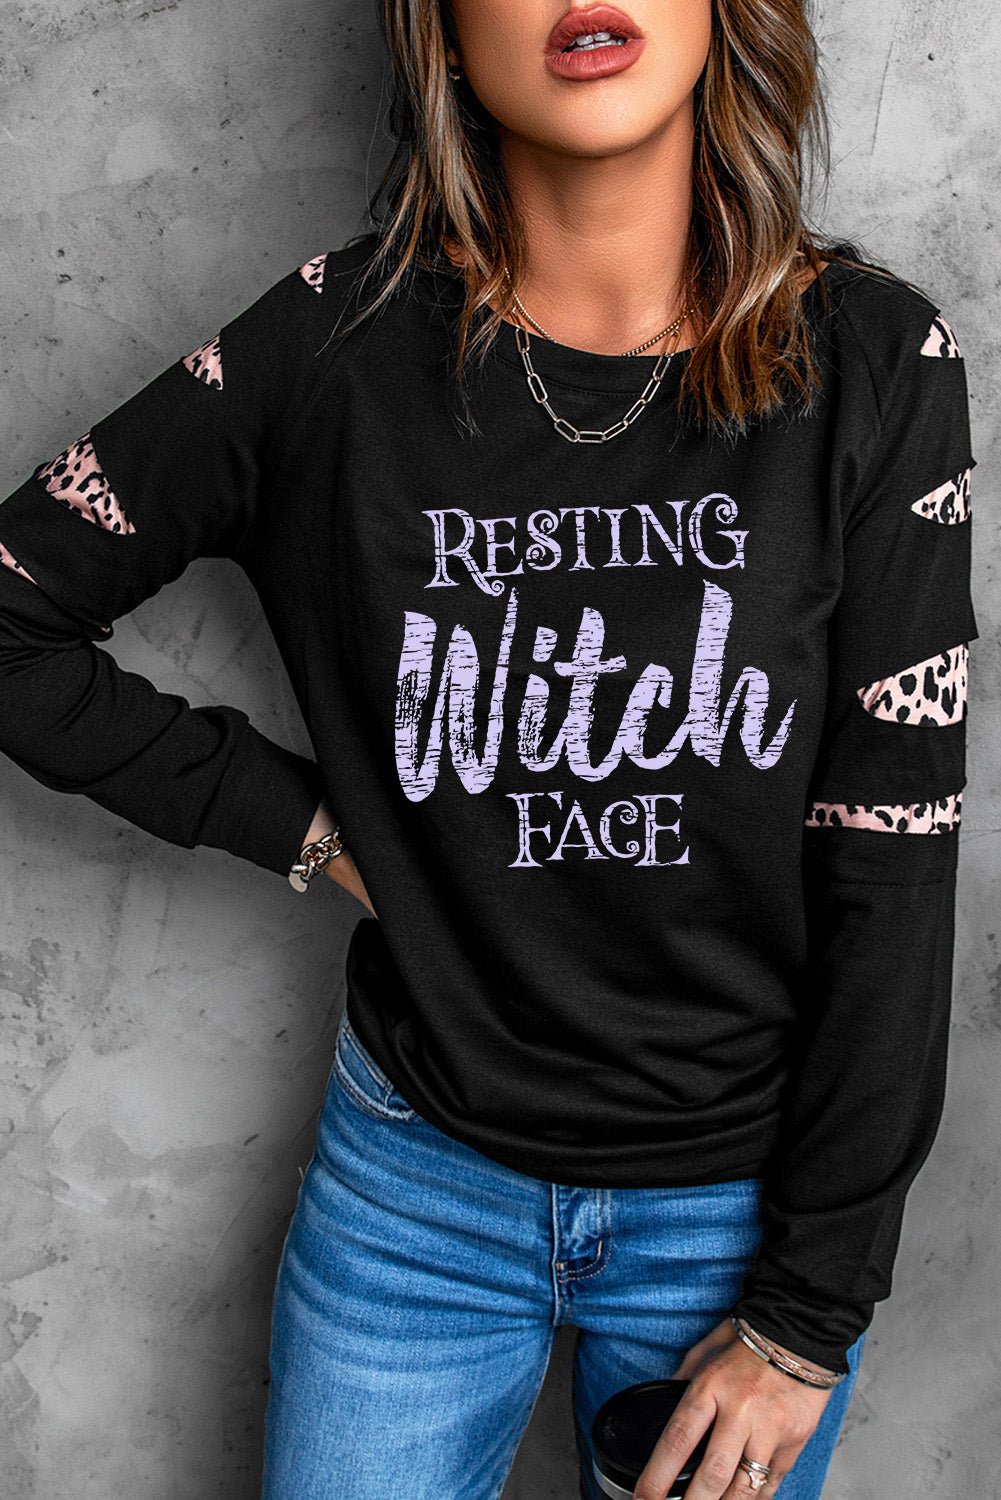 RESTING WITCH FACE Graphic Sweatshirt - GemThreads Boutique